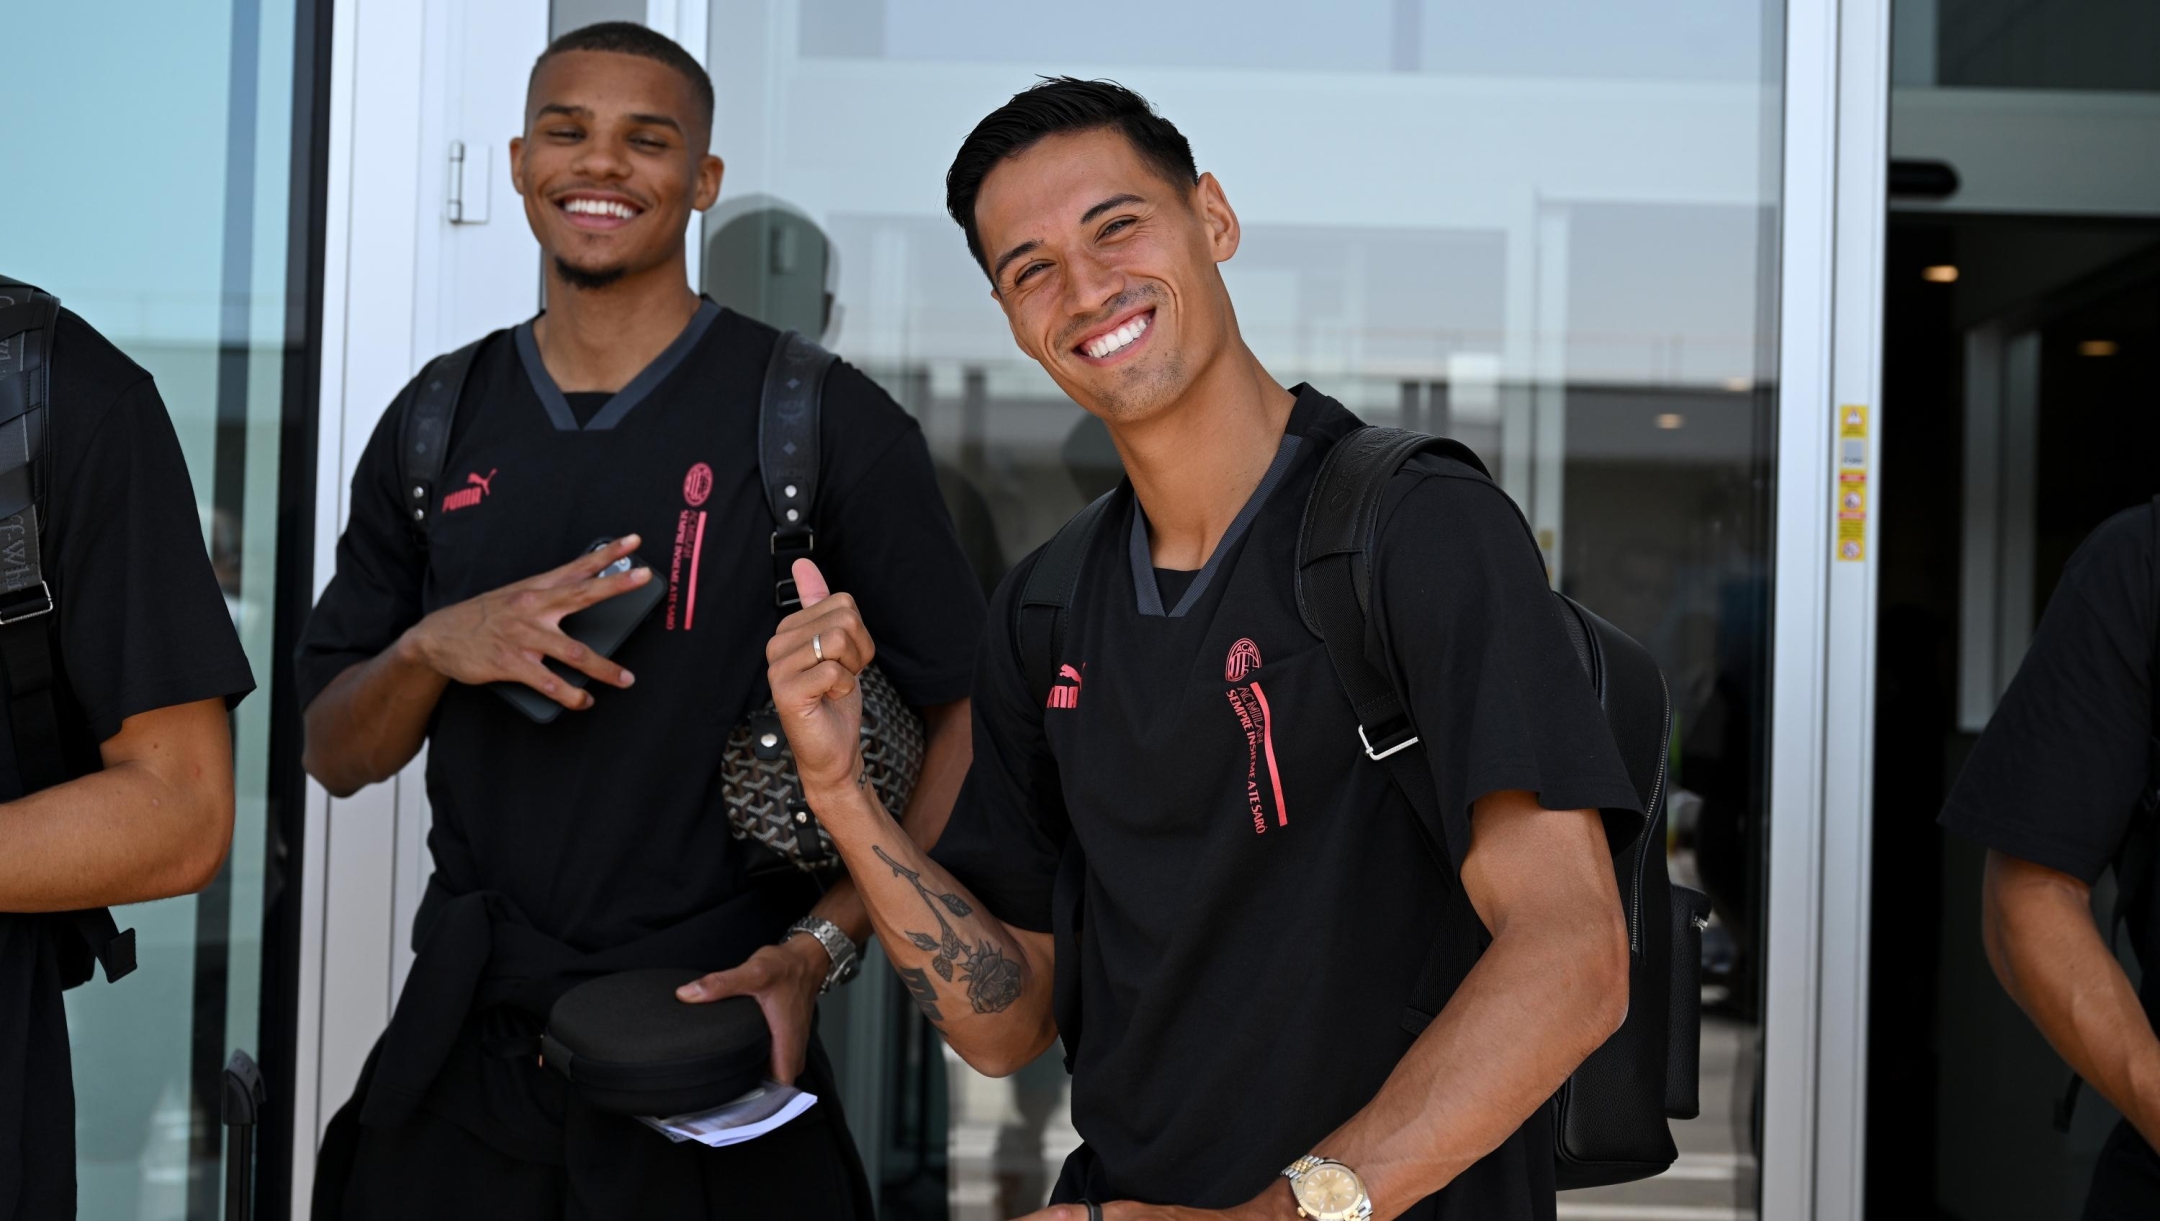 MILAN, ITALY - JULY 21: Tijjani Reijnders and Malick Thiaw smile ahead of AC Milan travel To Los Angeles on July 21, 2023 in Milan, Italy. (Photo by Claudio Villa/AC Milan via Getty Images)